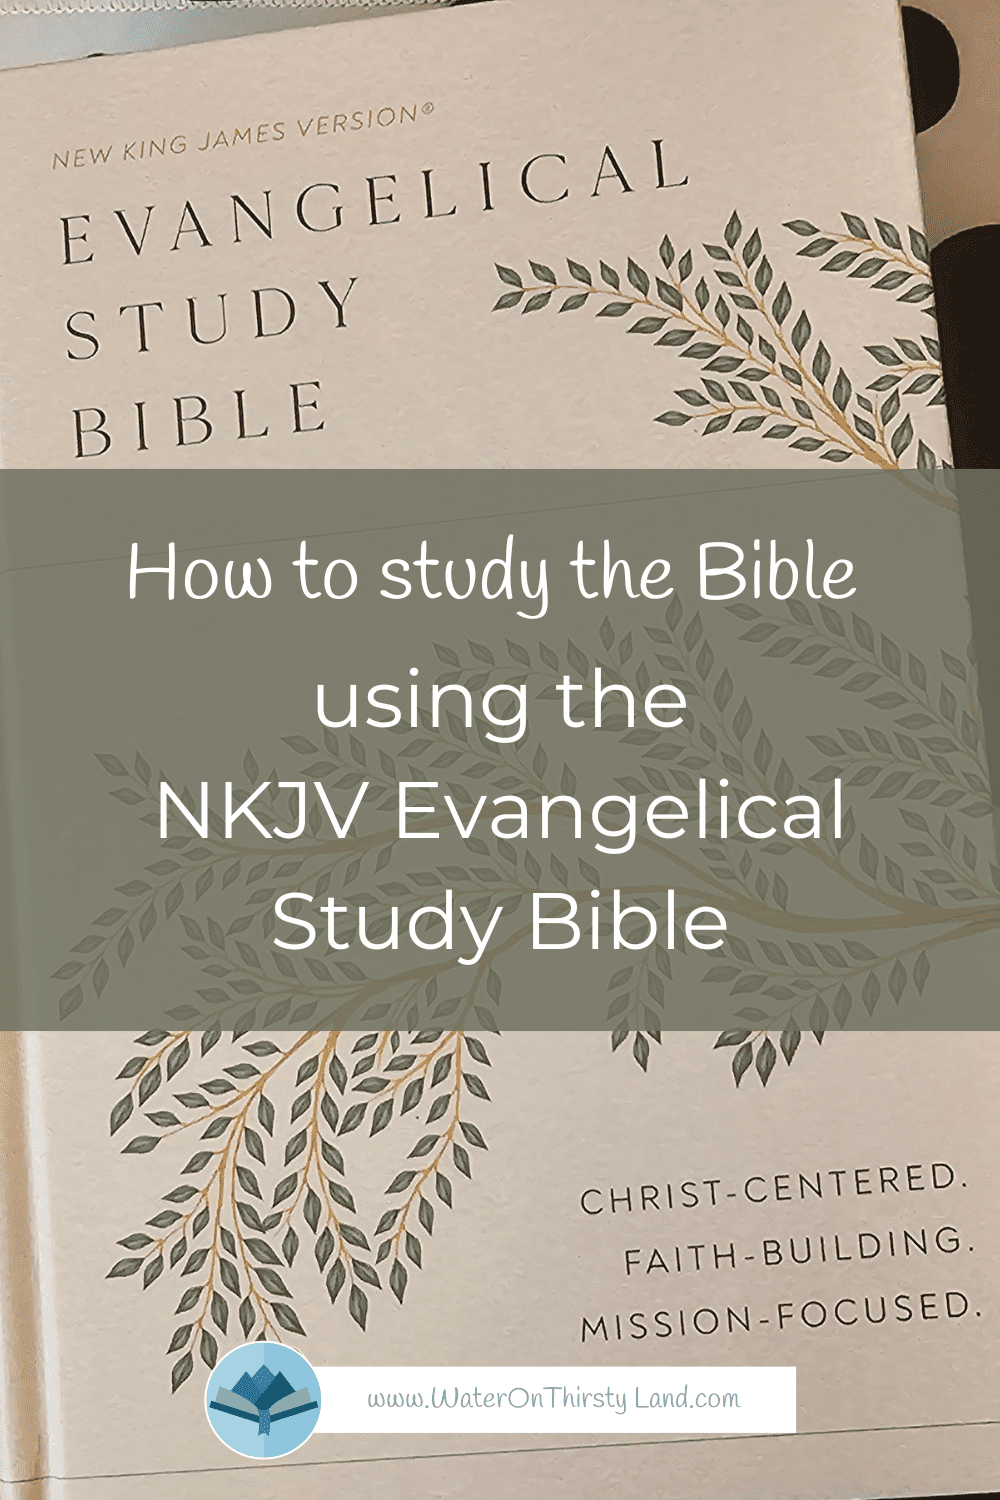 How to study the Bible using the NKJV Evangelical Study Bible